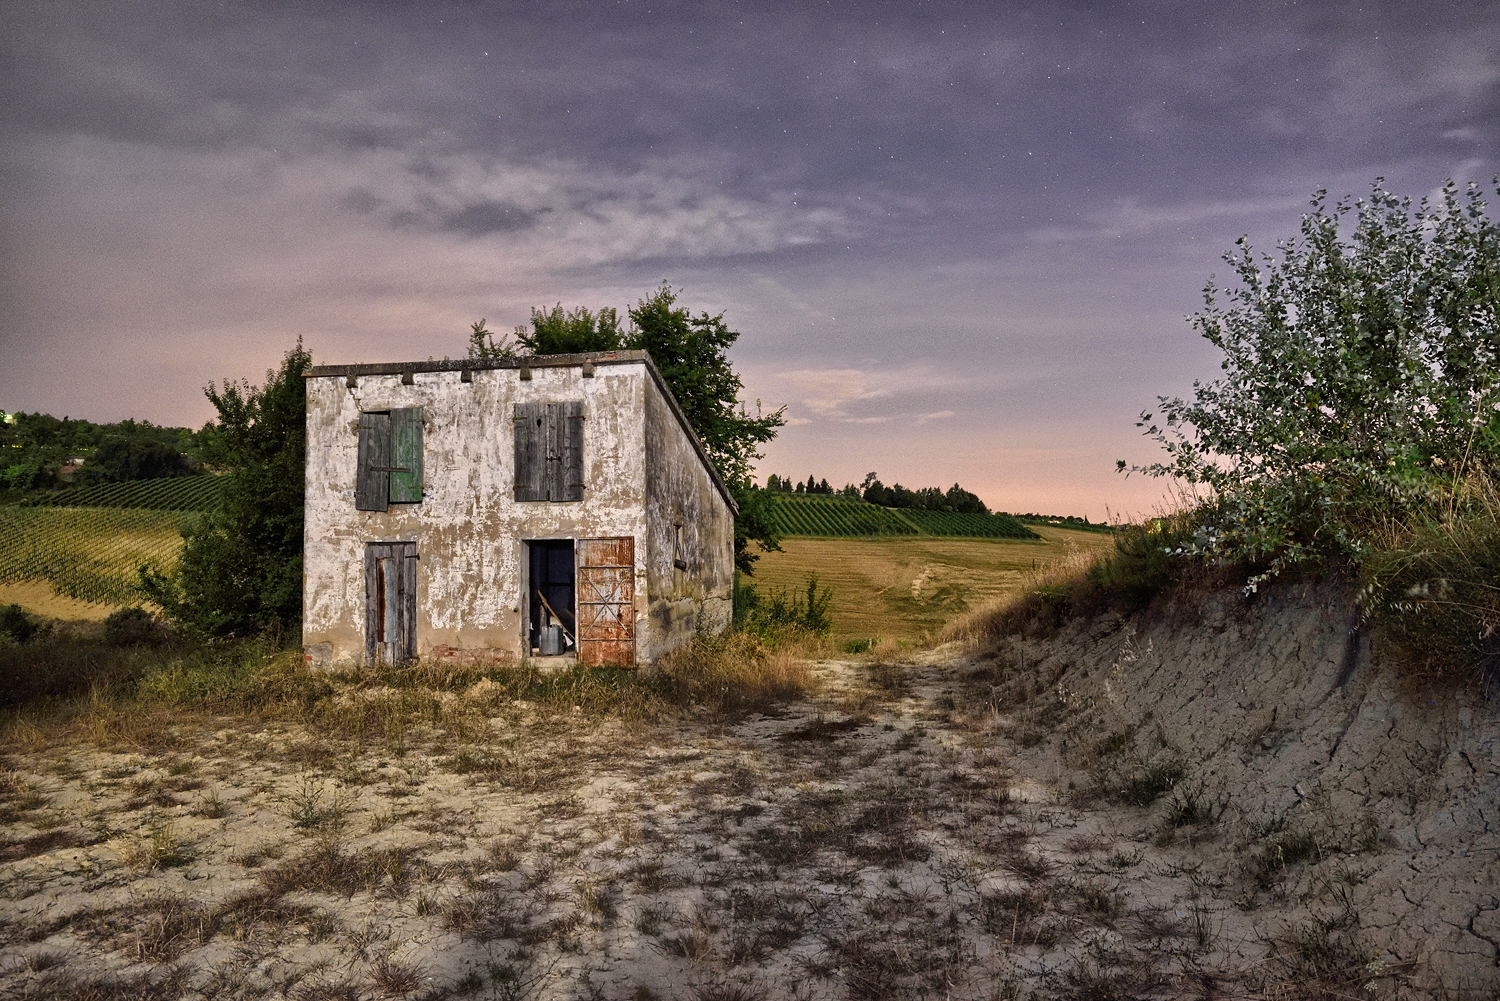 The abandoned house ......